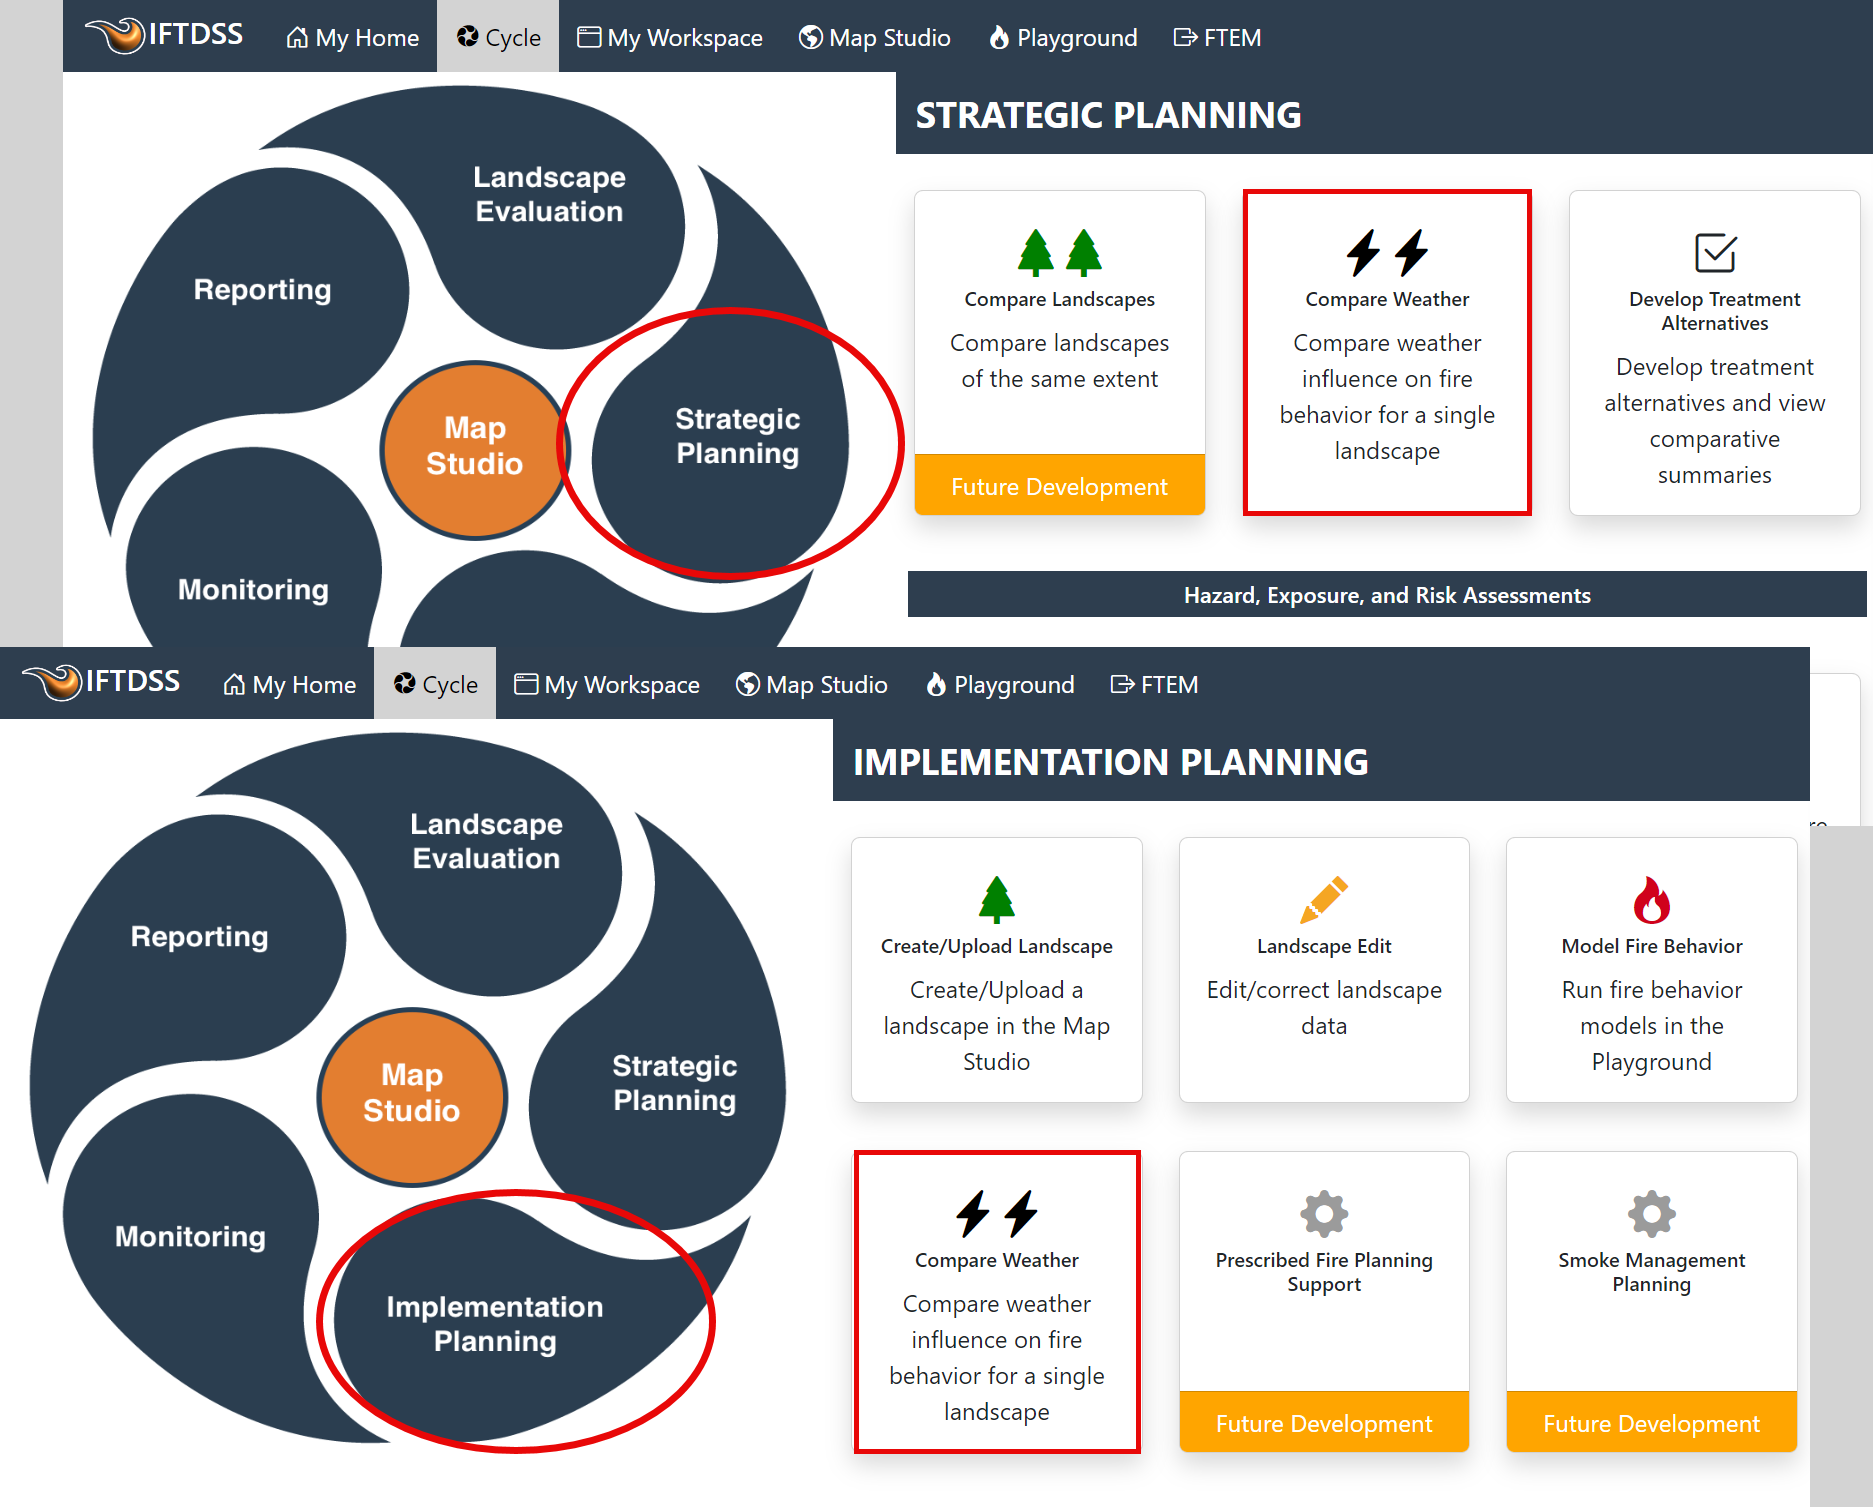 Compare Weather can be opened from the "implementation planning" and "strategic planning" stages of the cycle